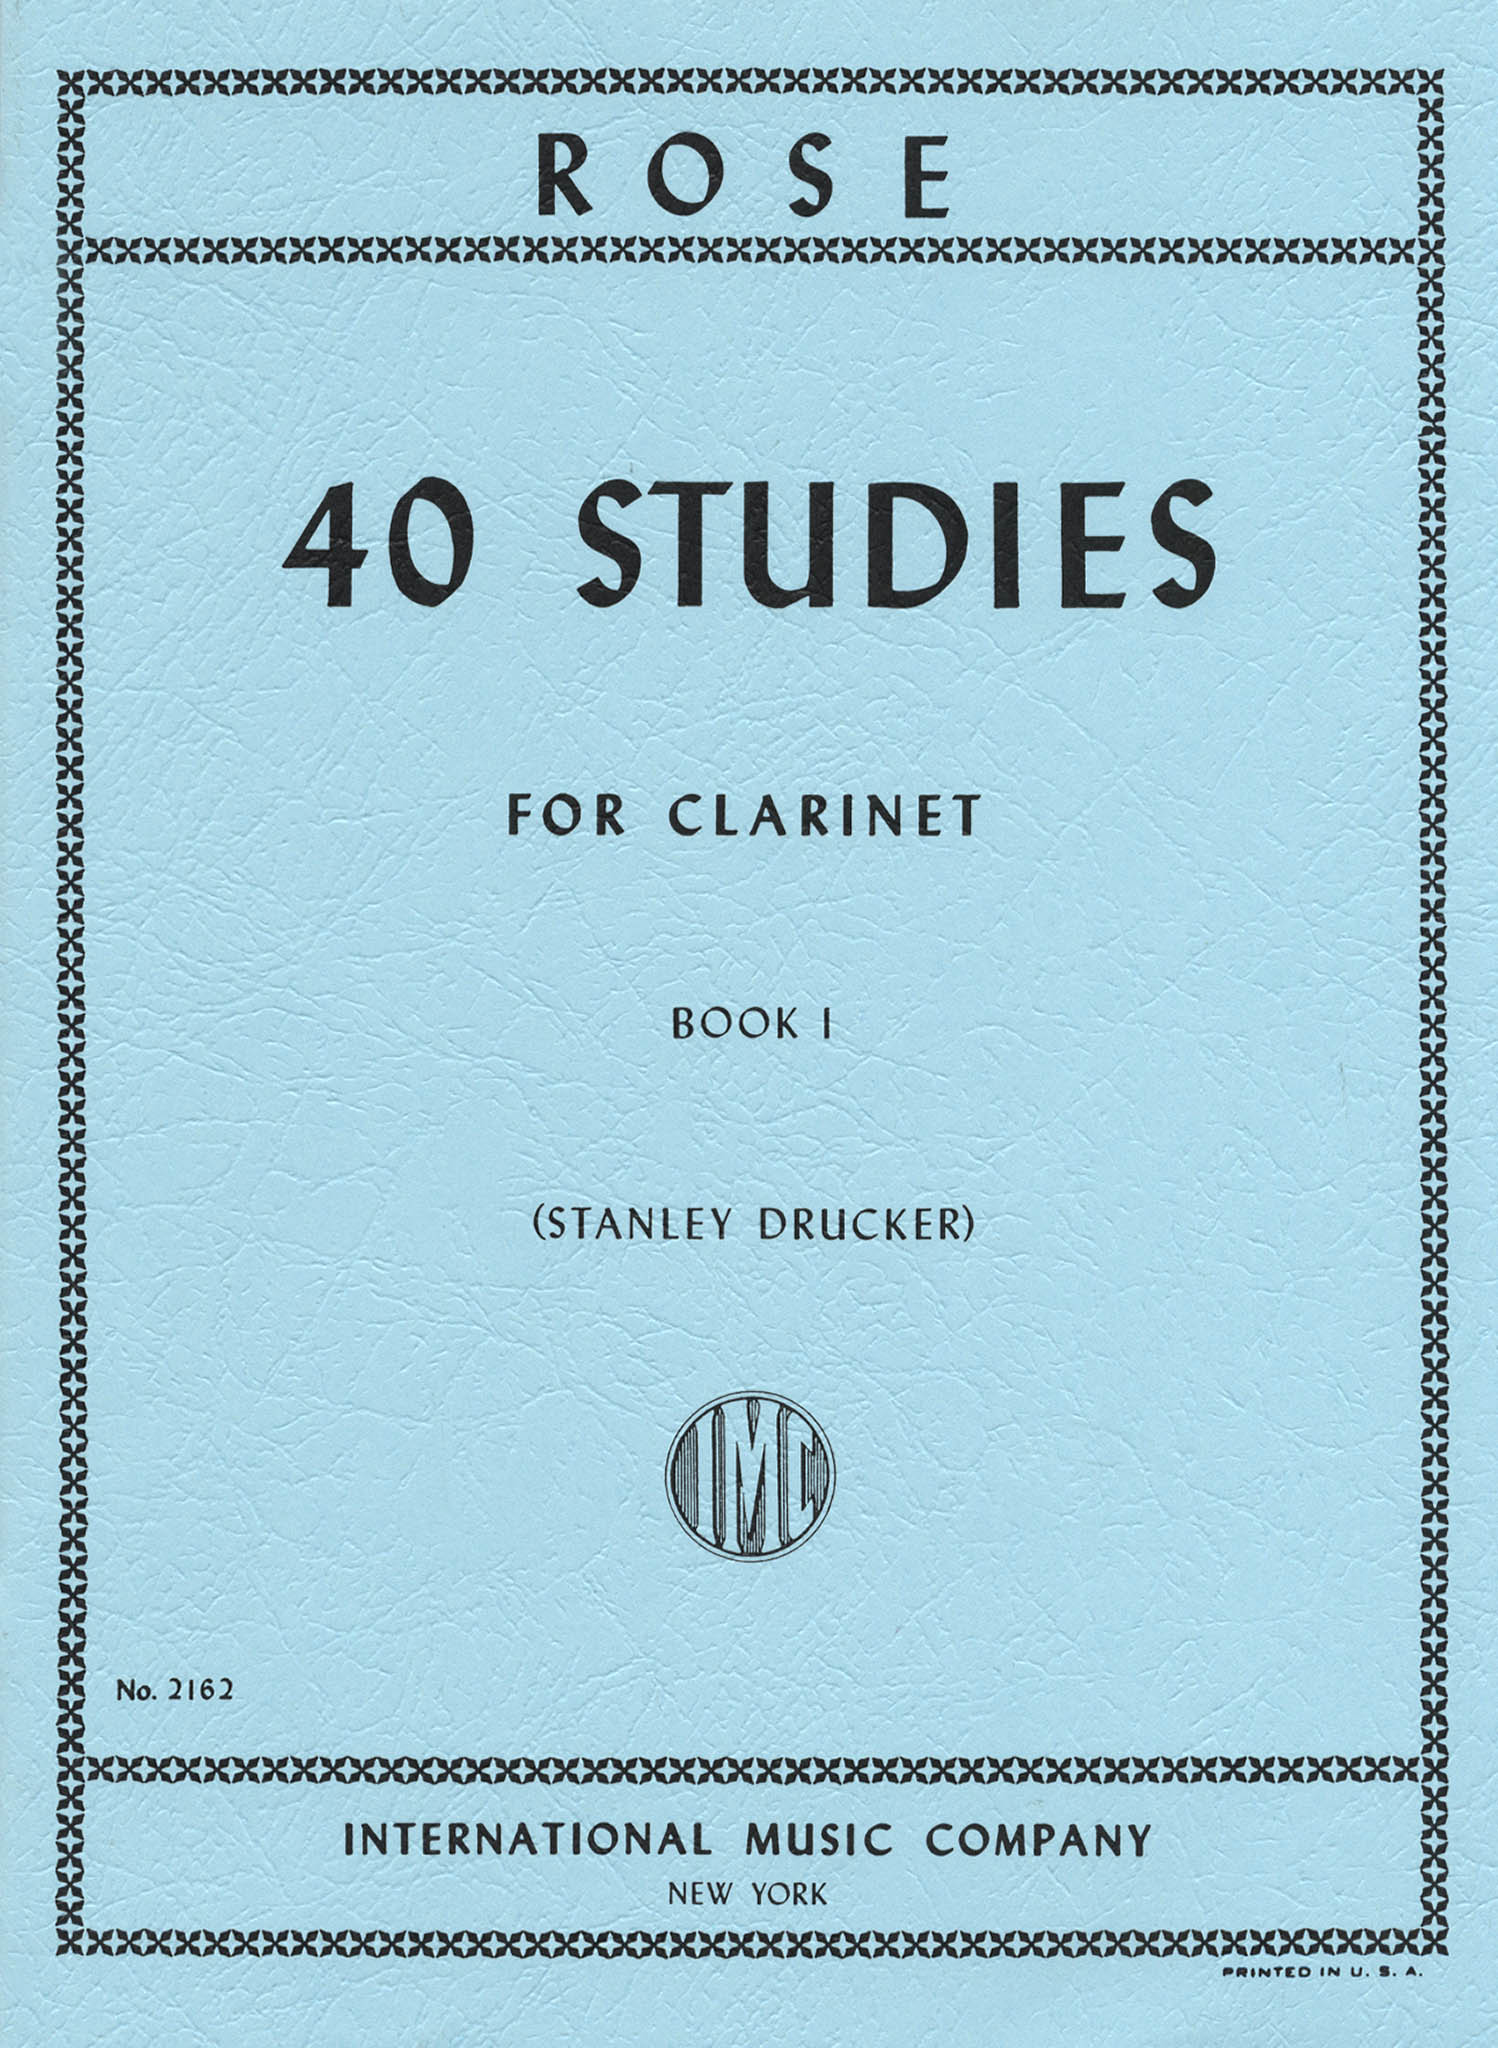 40 Études for Clarinet, Book 1 of 2 Cover